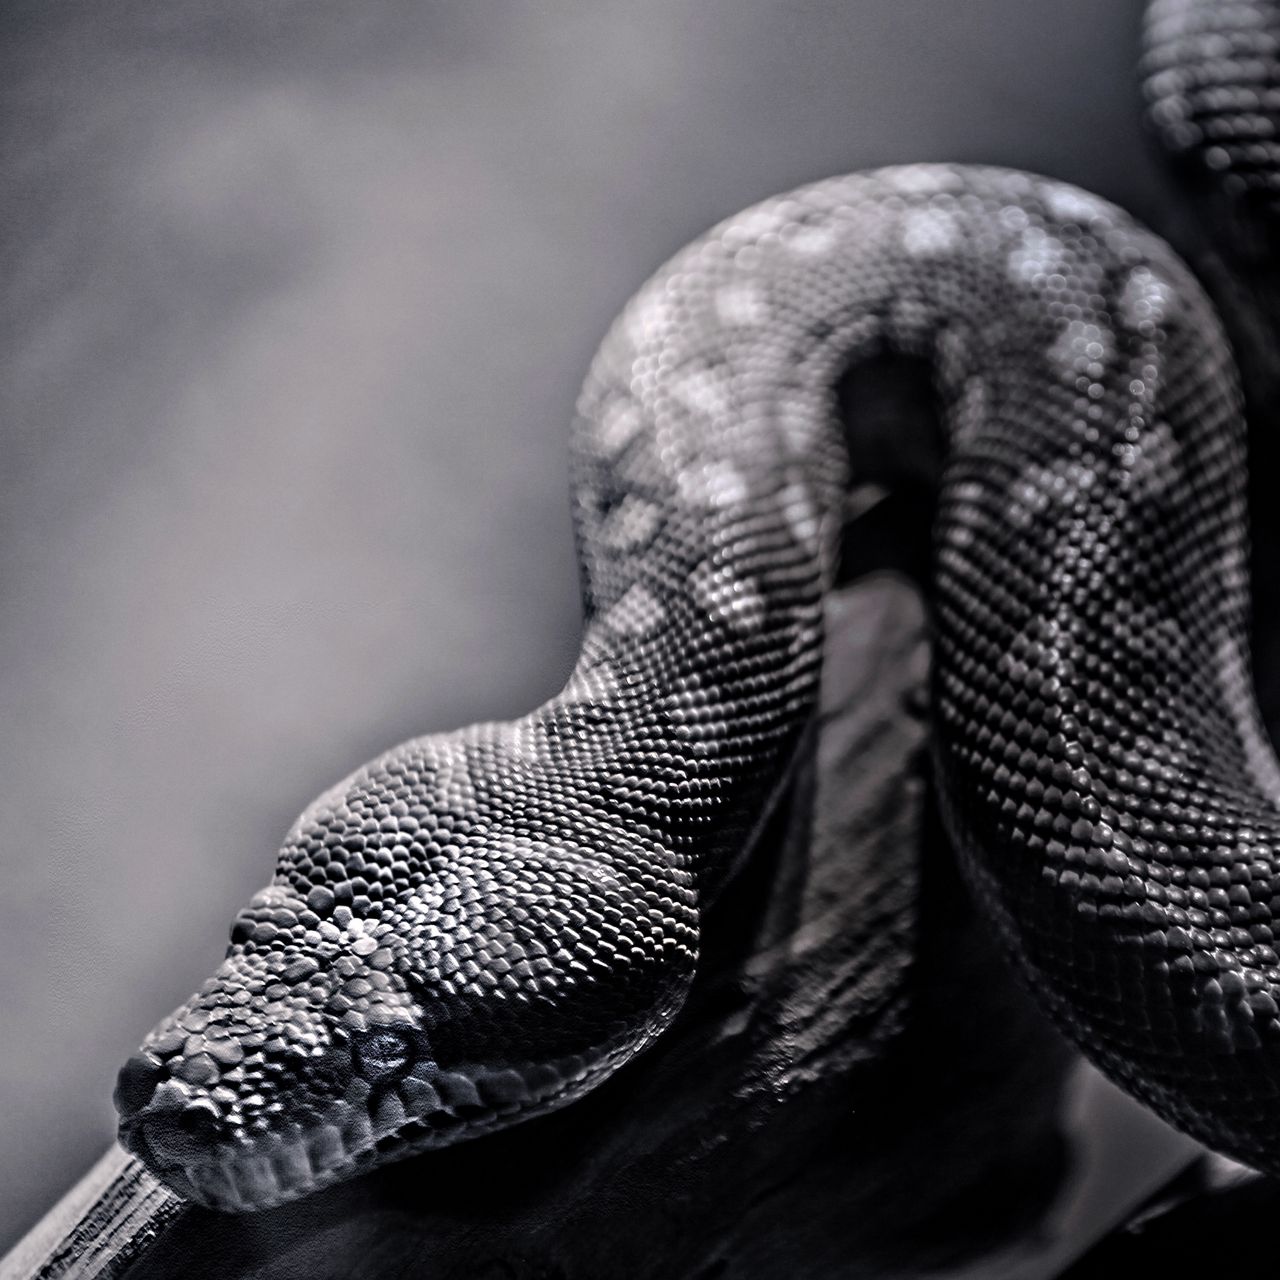 Download wallpaper 1280x1280 snake, spotted, crawling, reptile ipad, ipad  2, ipad mini for parallax hd background